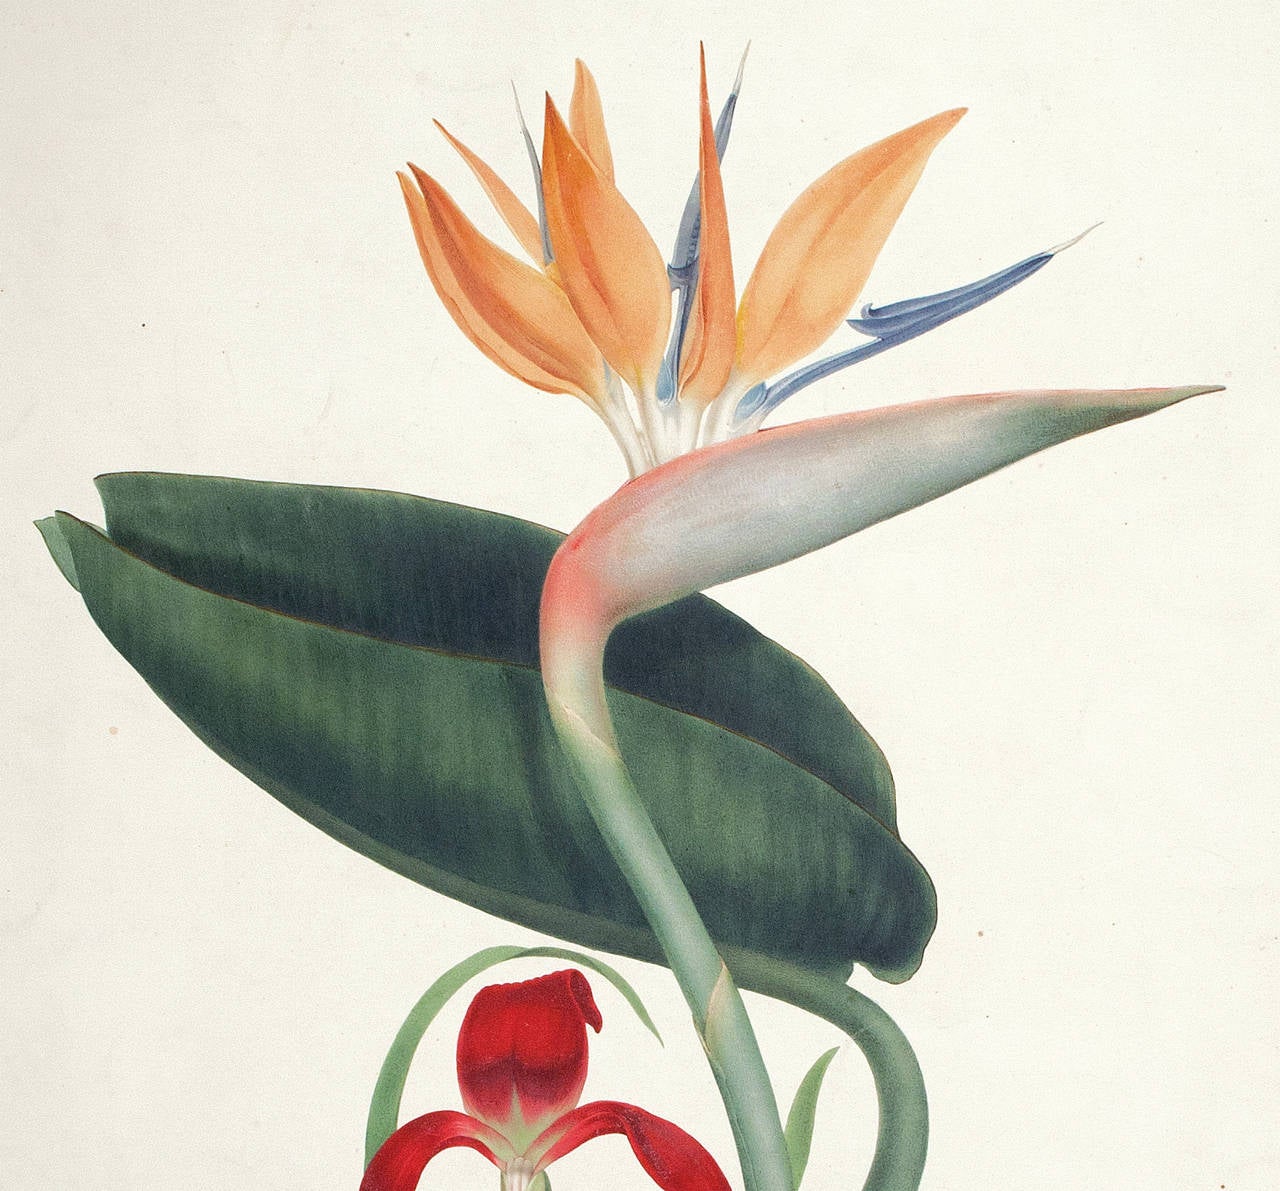 Bird of Paradise and Amaryllis by Augusta Withers. London, circa 1830. Original watercolor on artist's board.  

Mrs. Augusta Innes Withers (active 1826-1865) exhibited at the Royal Academy in London from 1829 to 1846, was a member of the Society